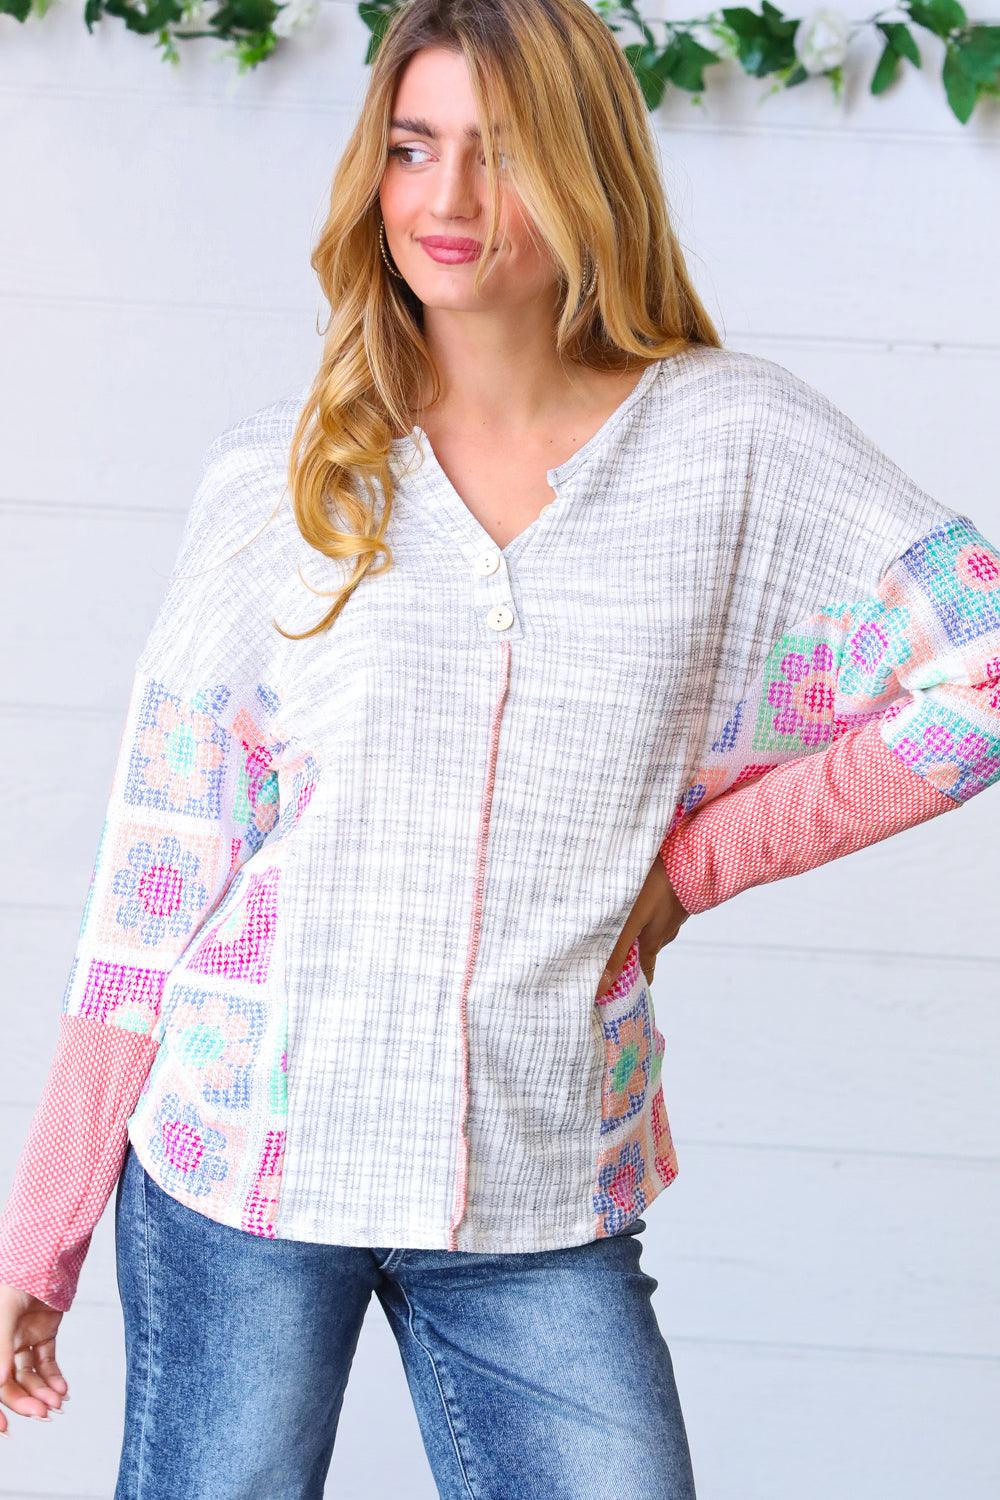 On The Vine Floral Print Top - Atomic Wildflower